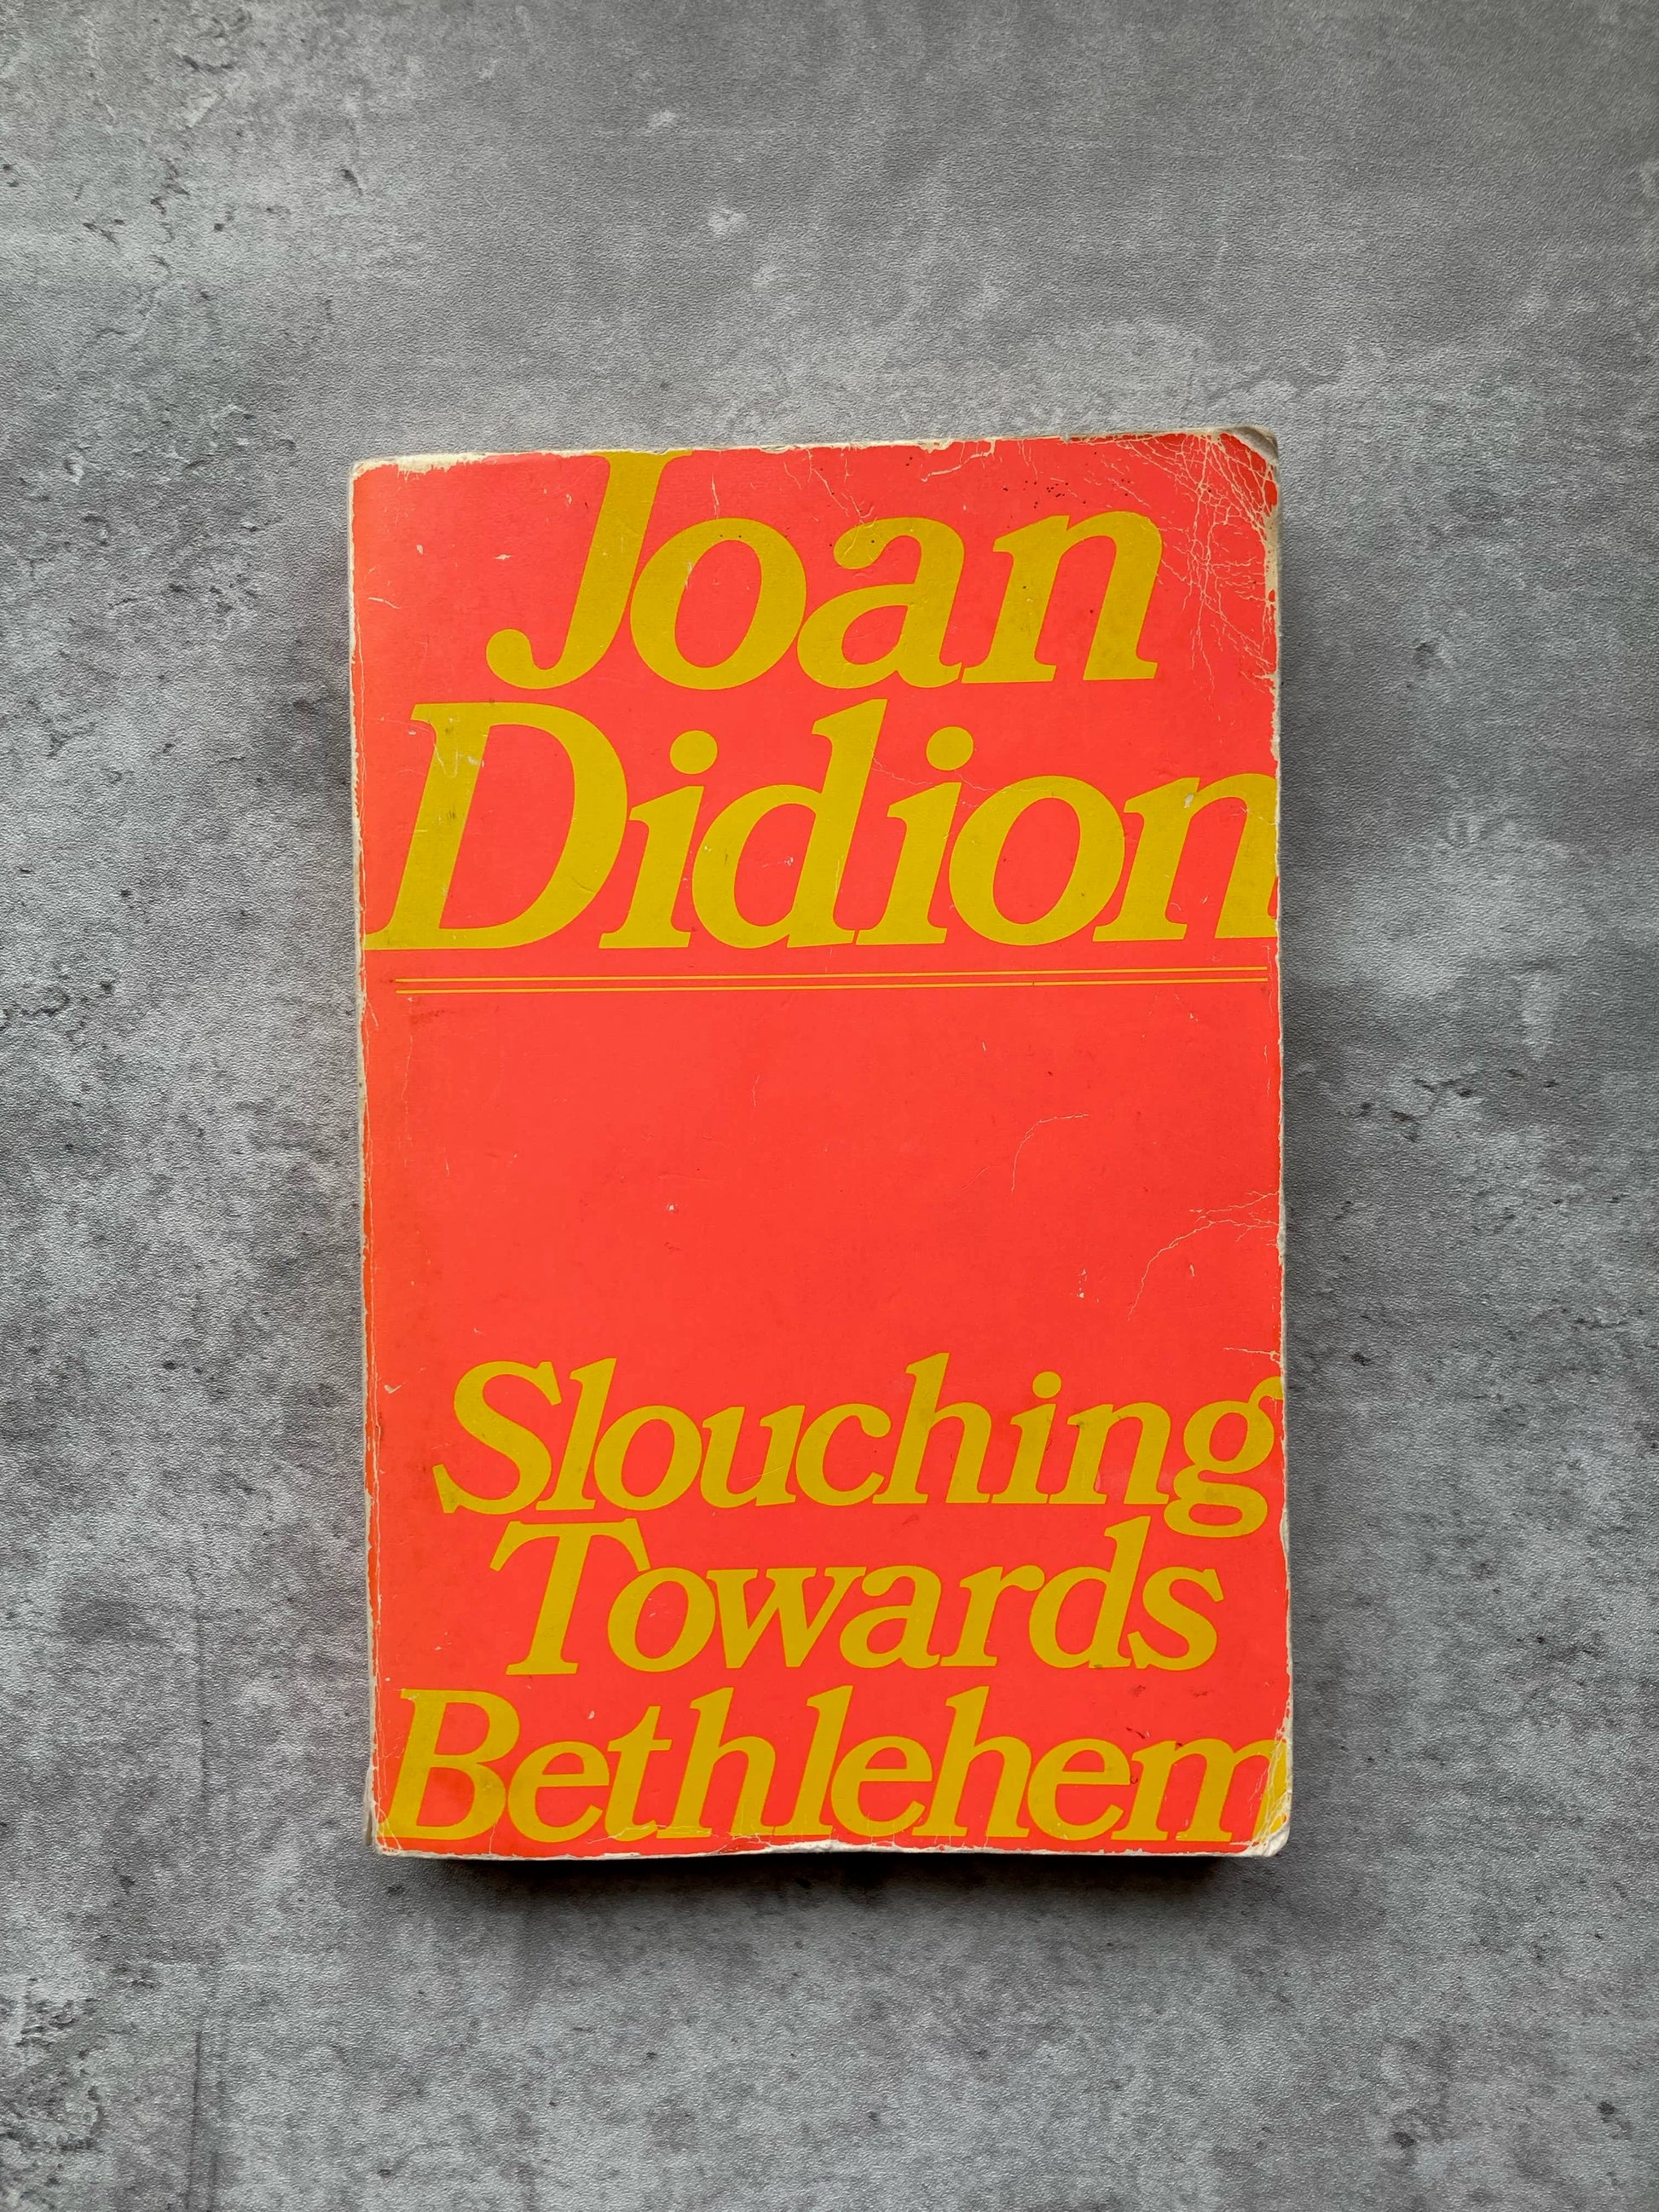 Slouching Towards Bethlehem by Joan Didion. Shop for new and used books with The Stone Circle, the only online bookstore near you in Los Angeles, California.